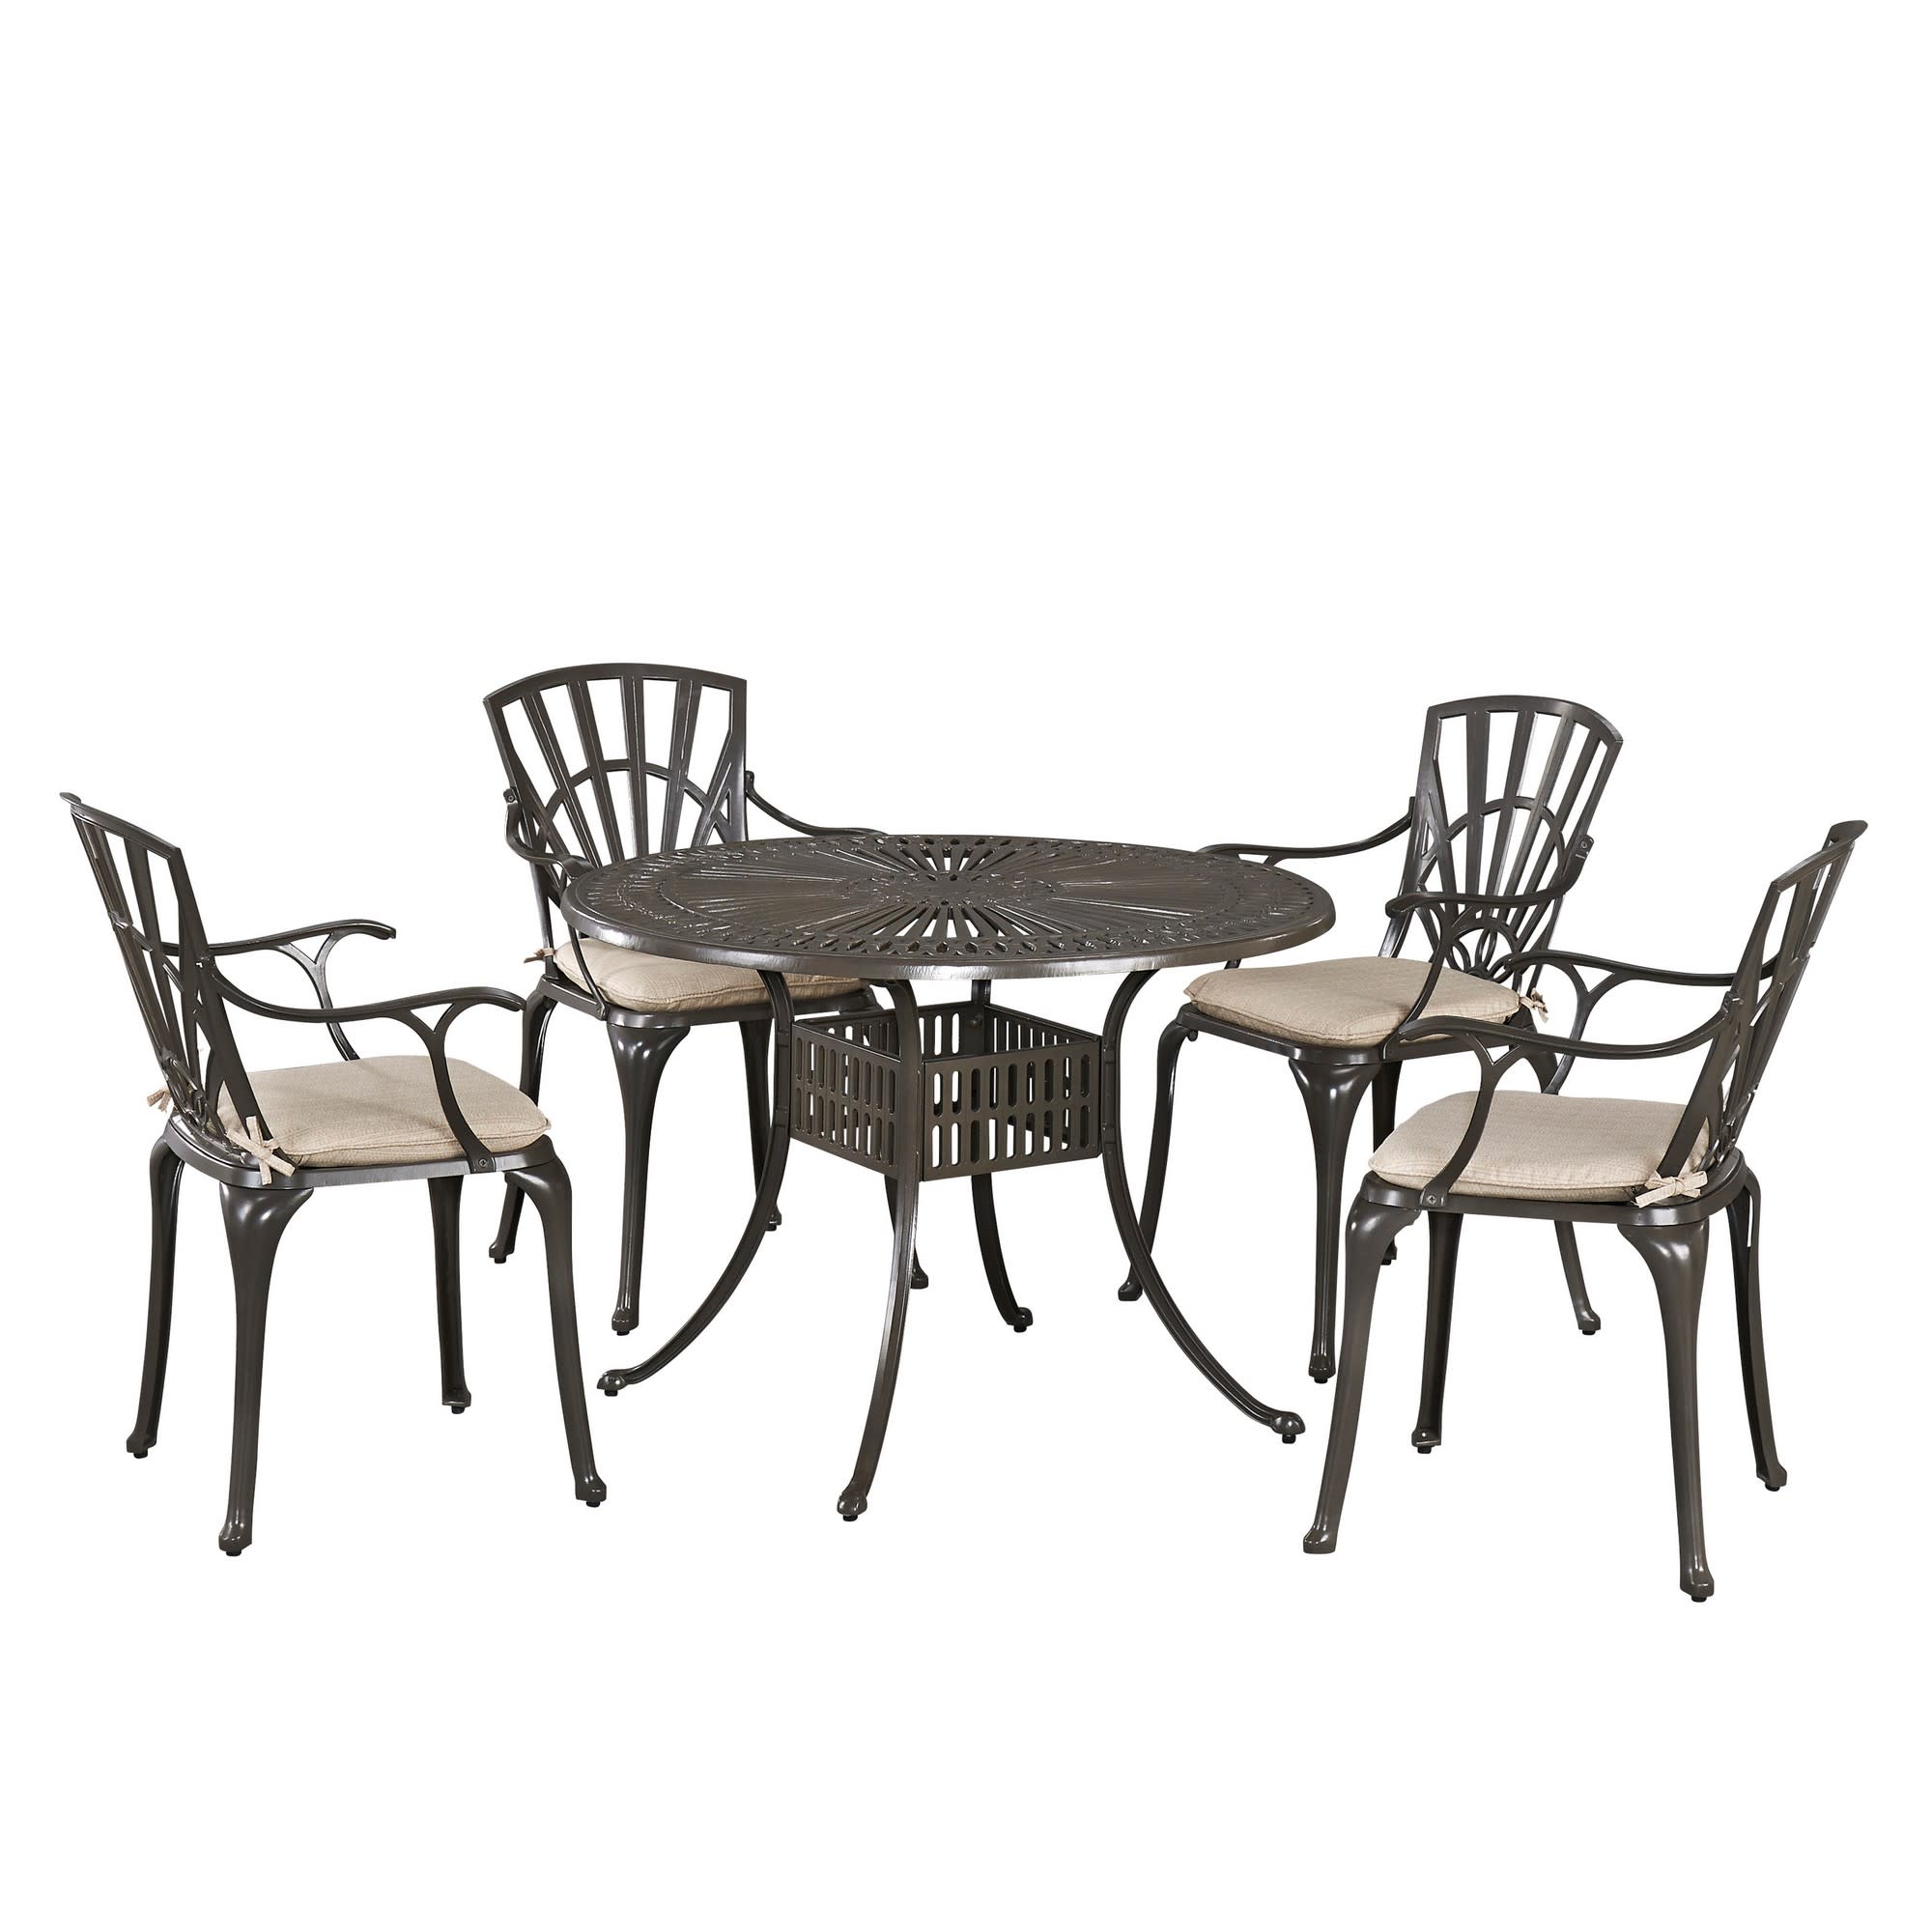 Grenada 5 Piece Outdoor Dining Set by Homestyles - Khaki Gray - Aluminum, Upholstered, Fabric - 6661-308C